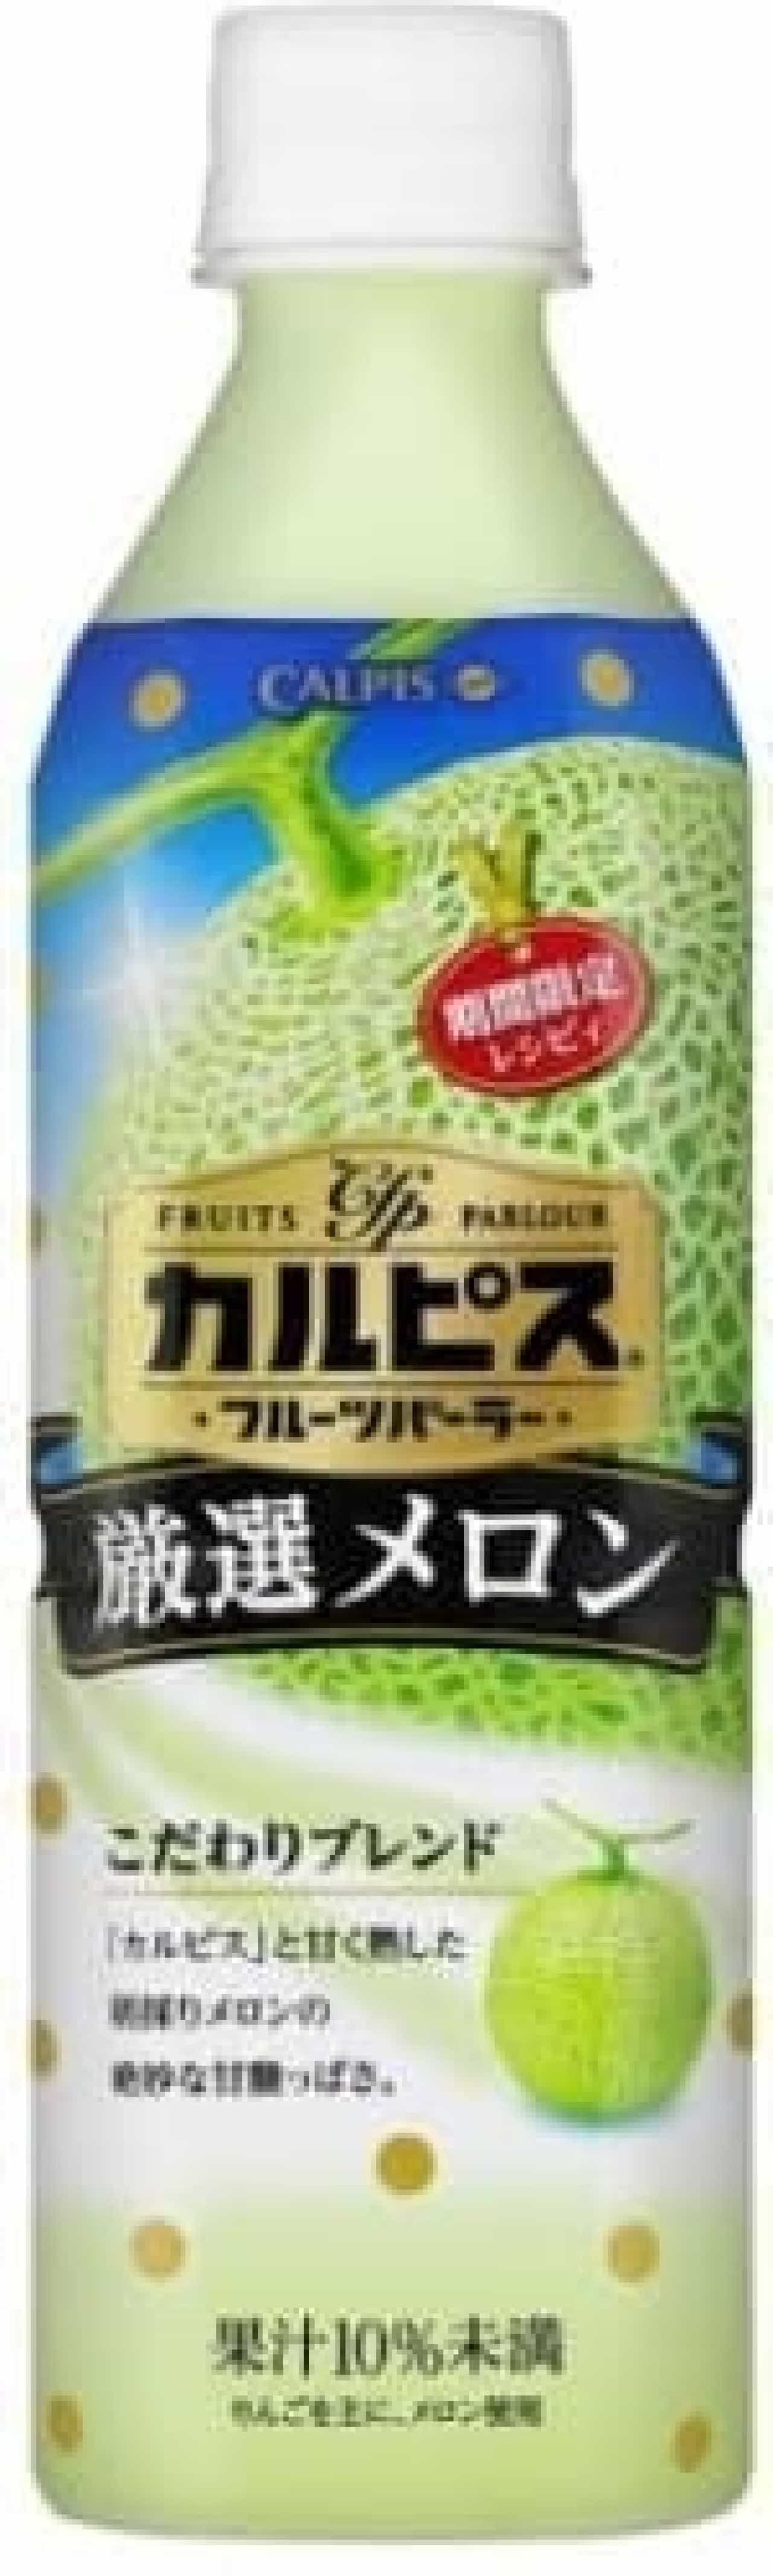 A refreshing flavor!